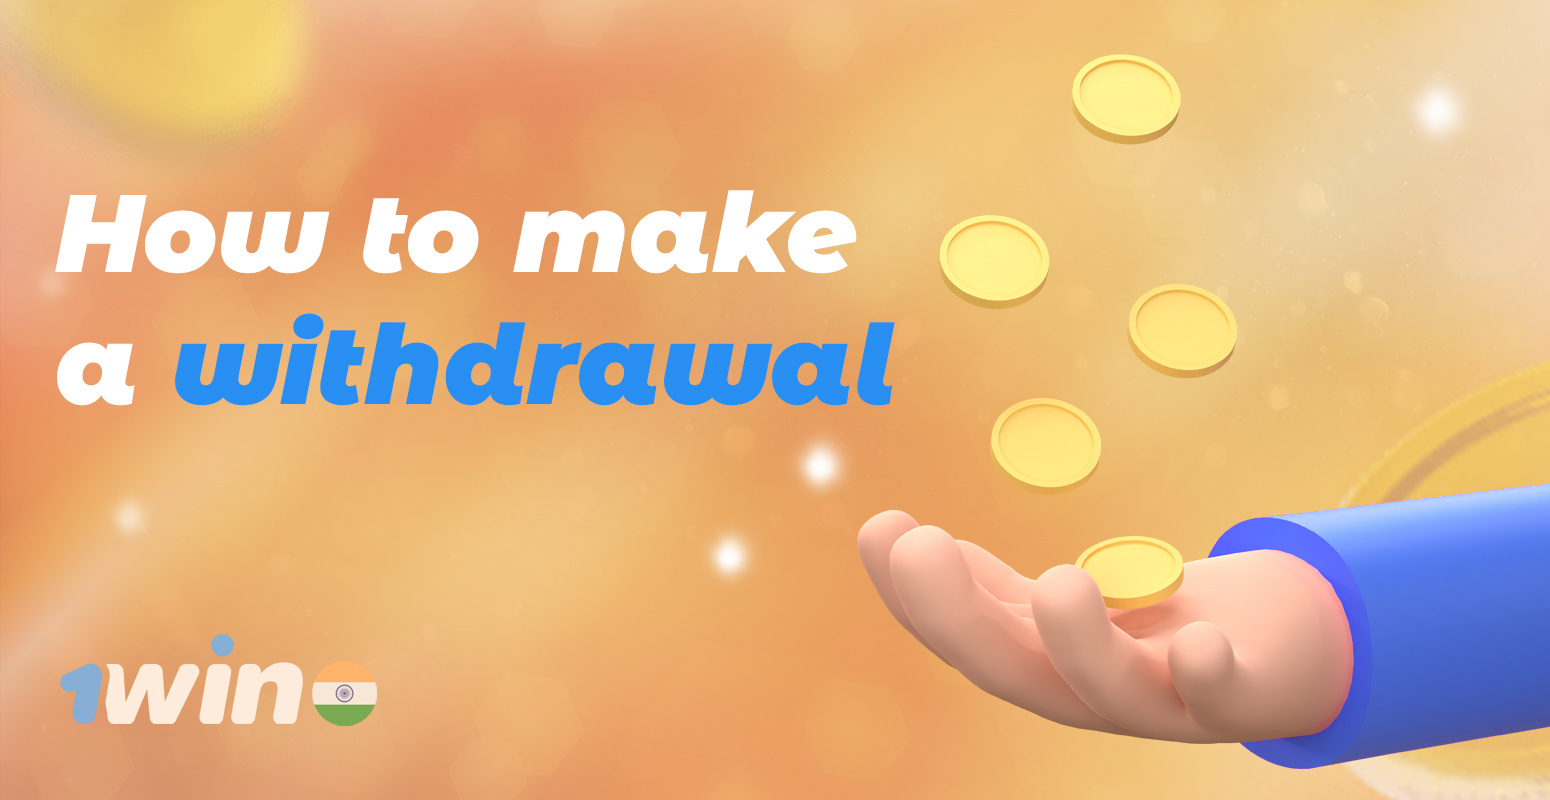 Instructions on how to withdraw funds from your 1win online casino account 